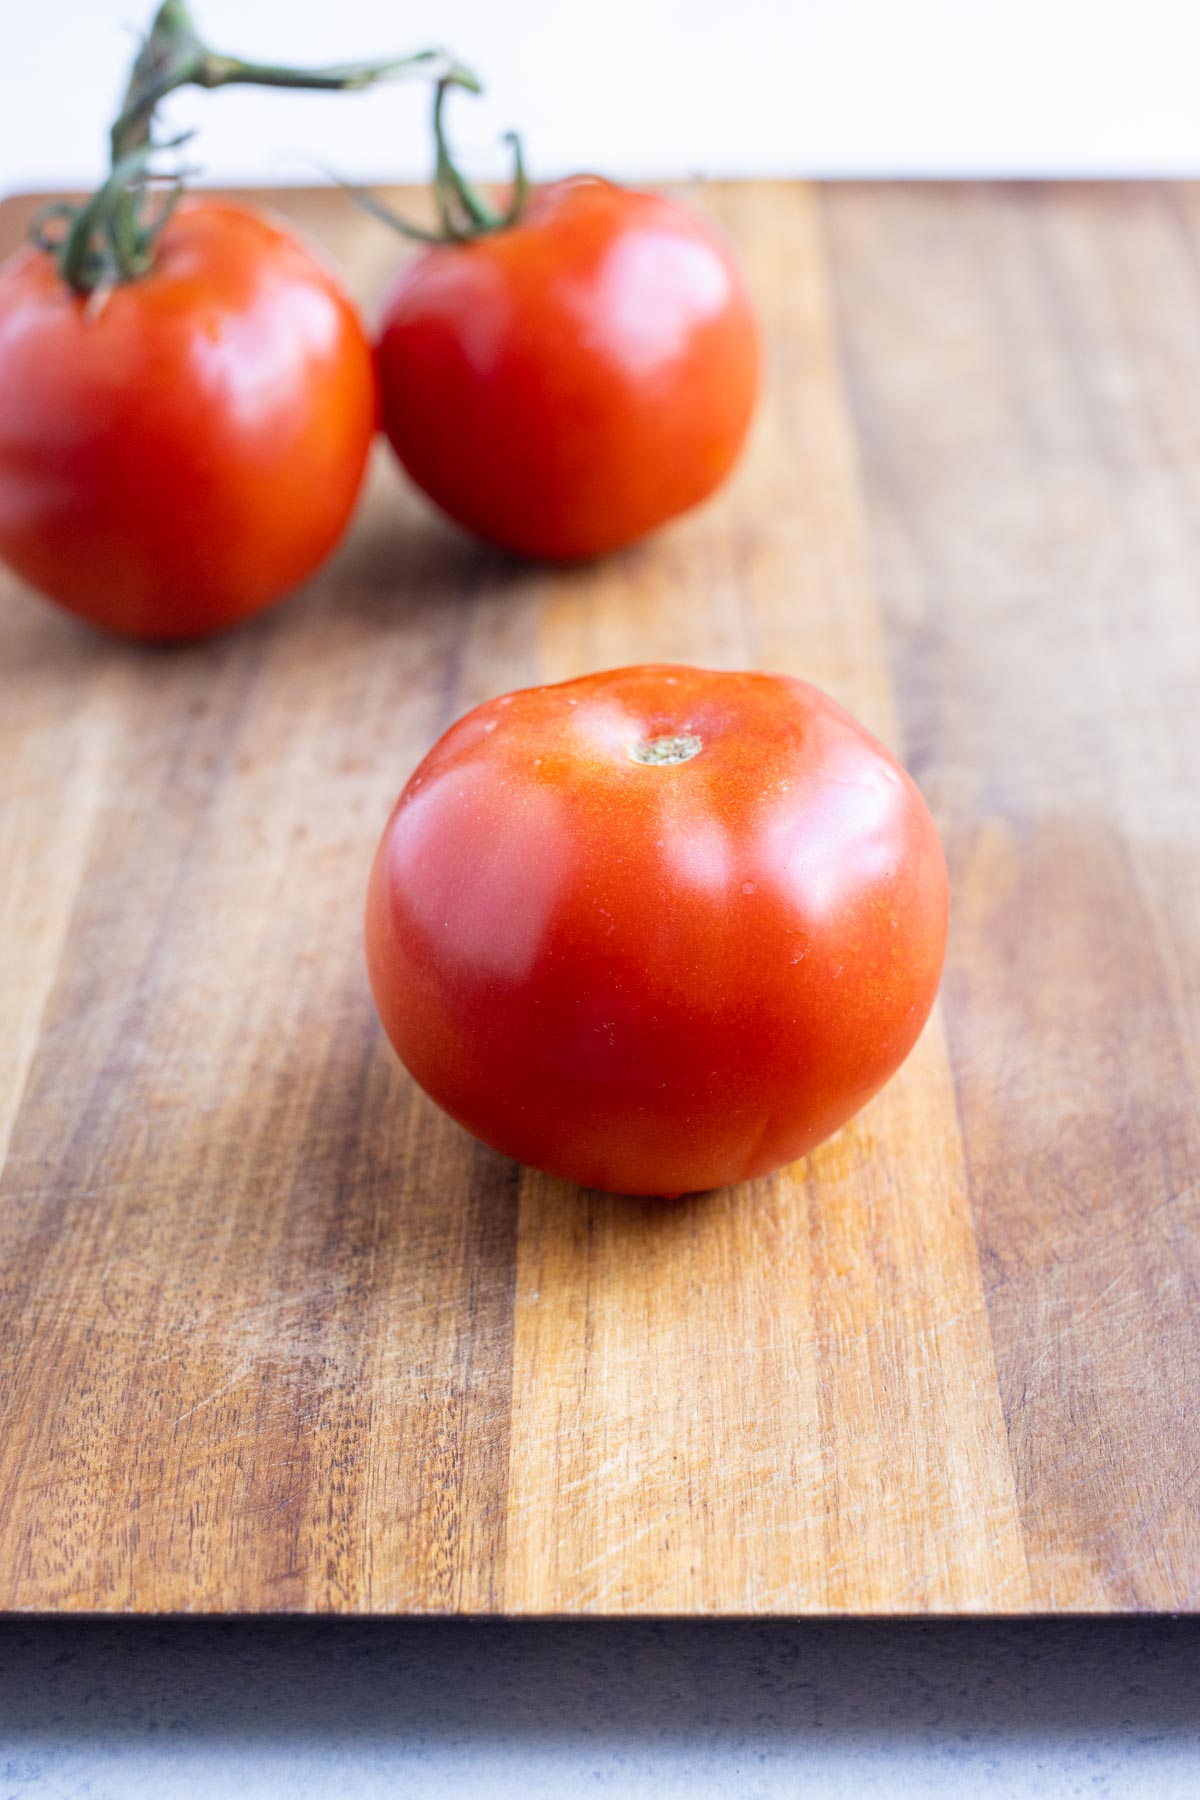 A firm, round tomato is on a cutting board.